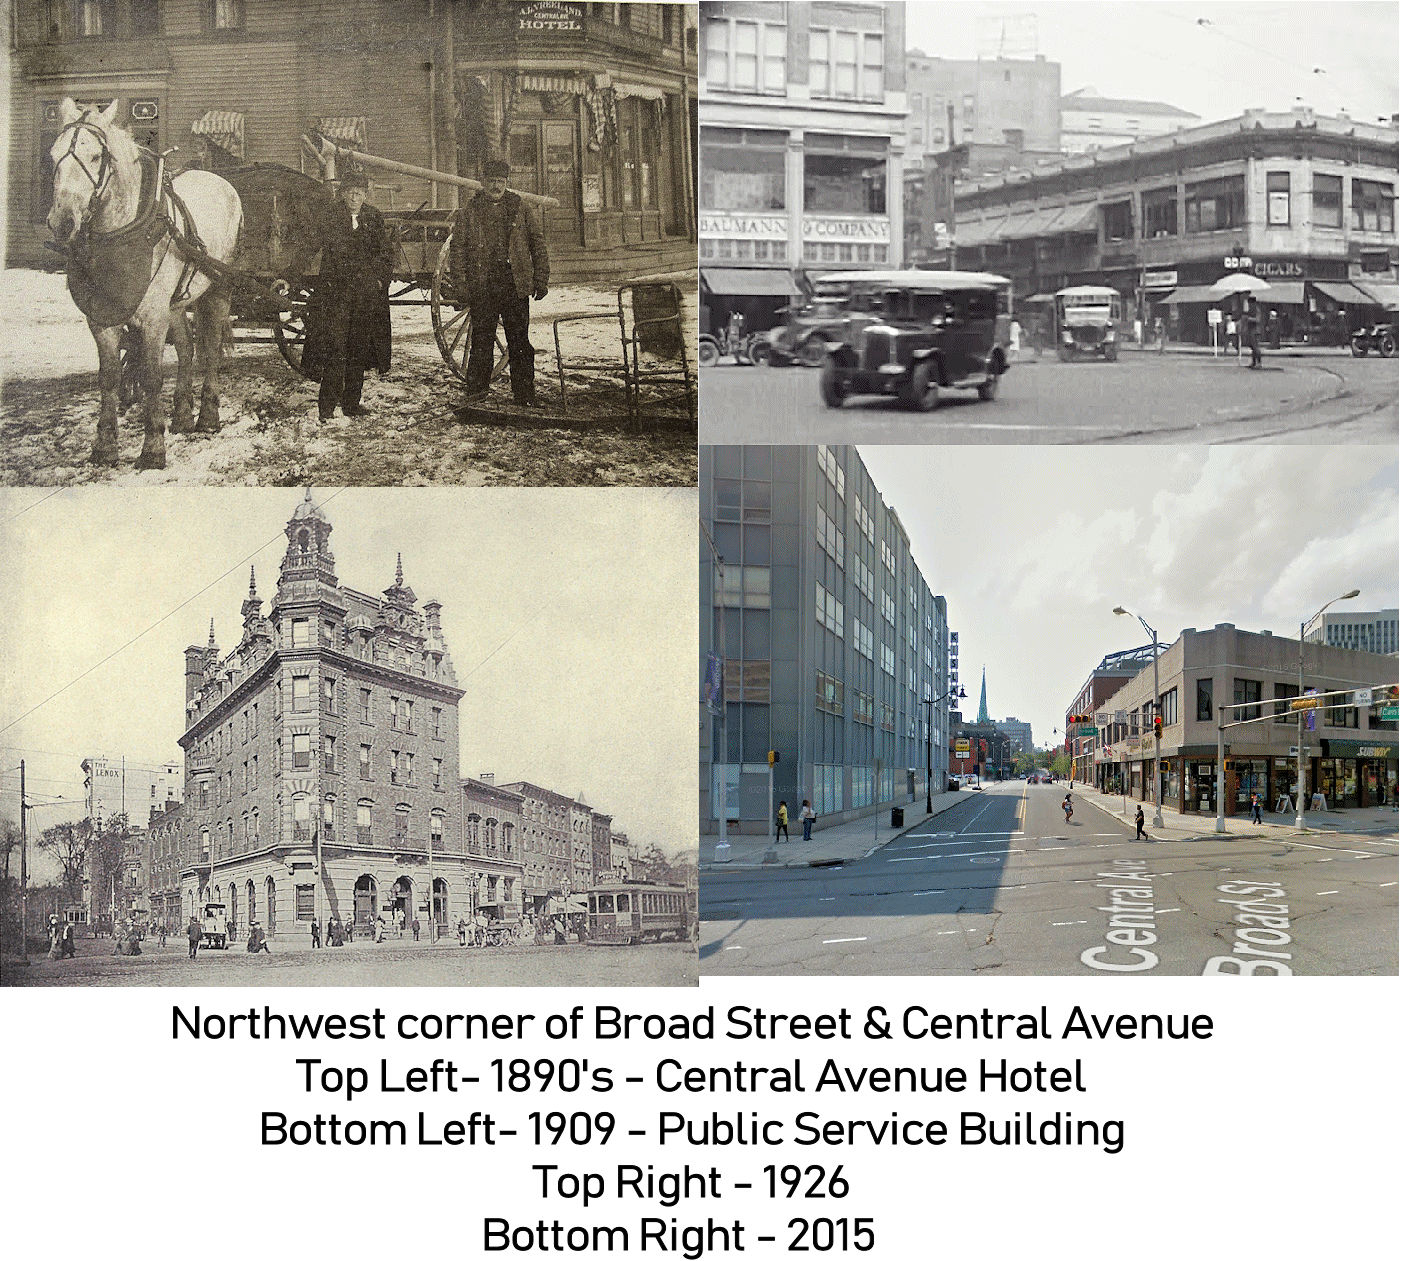 Central Avenue & Broad Street
